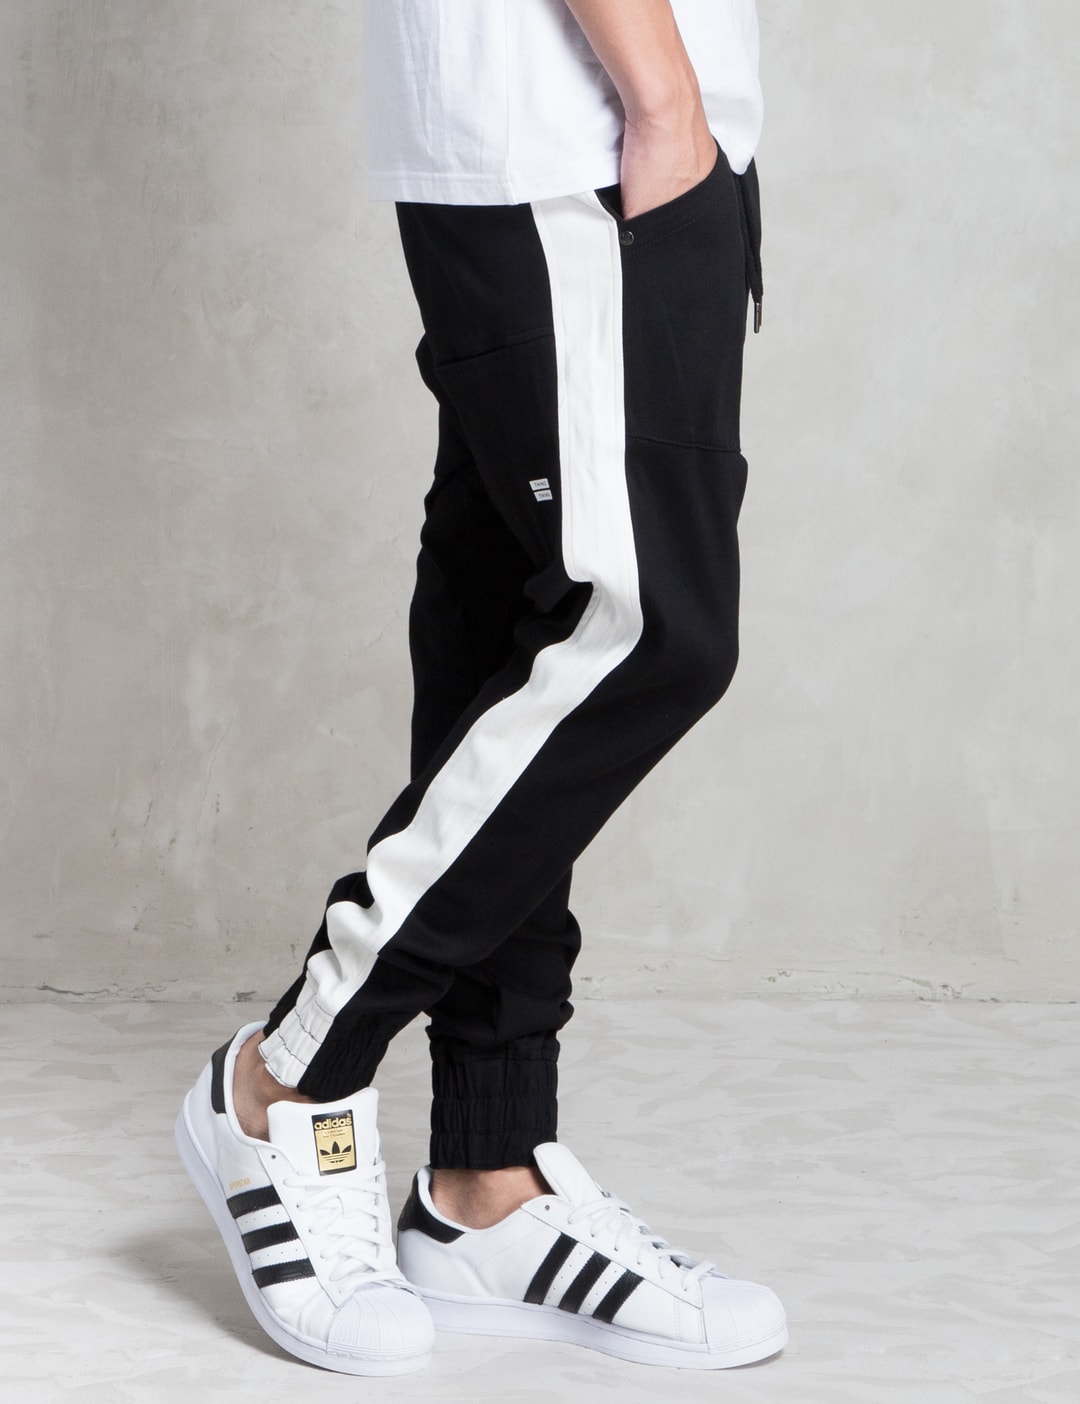 Thing Thing - Black/White Stripe Para Pants | HBX - Globally Curated ...